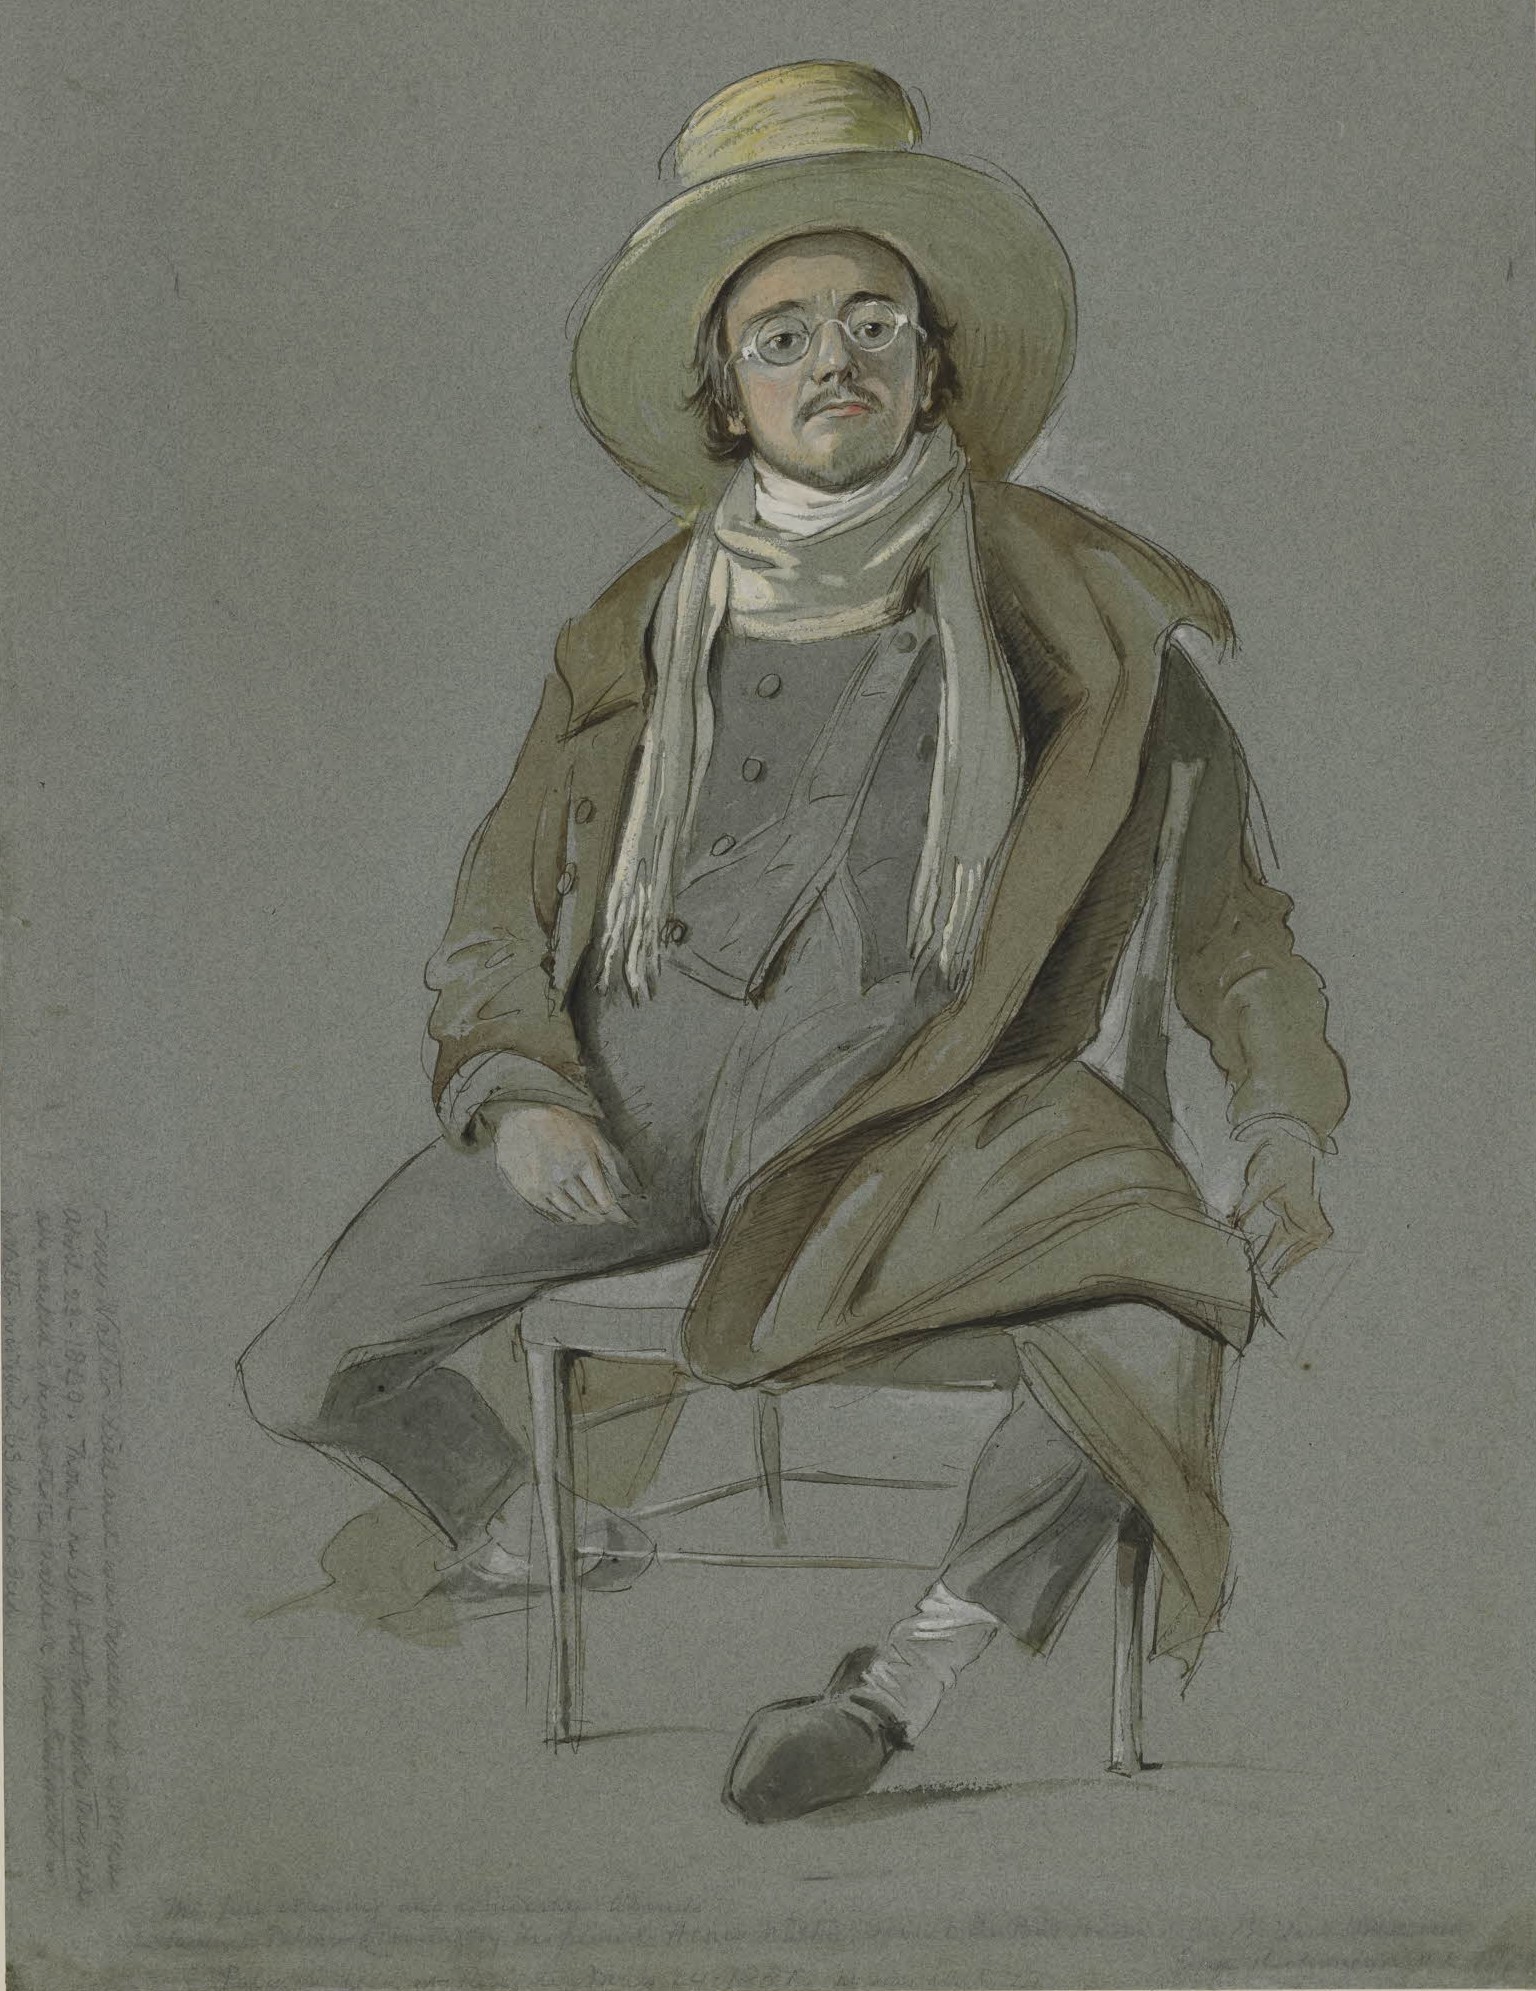 Old coloured portrait of man sitting on chair wearing a large hat